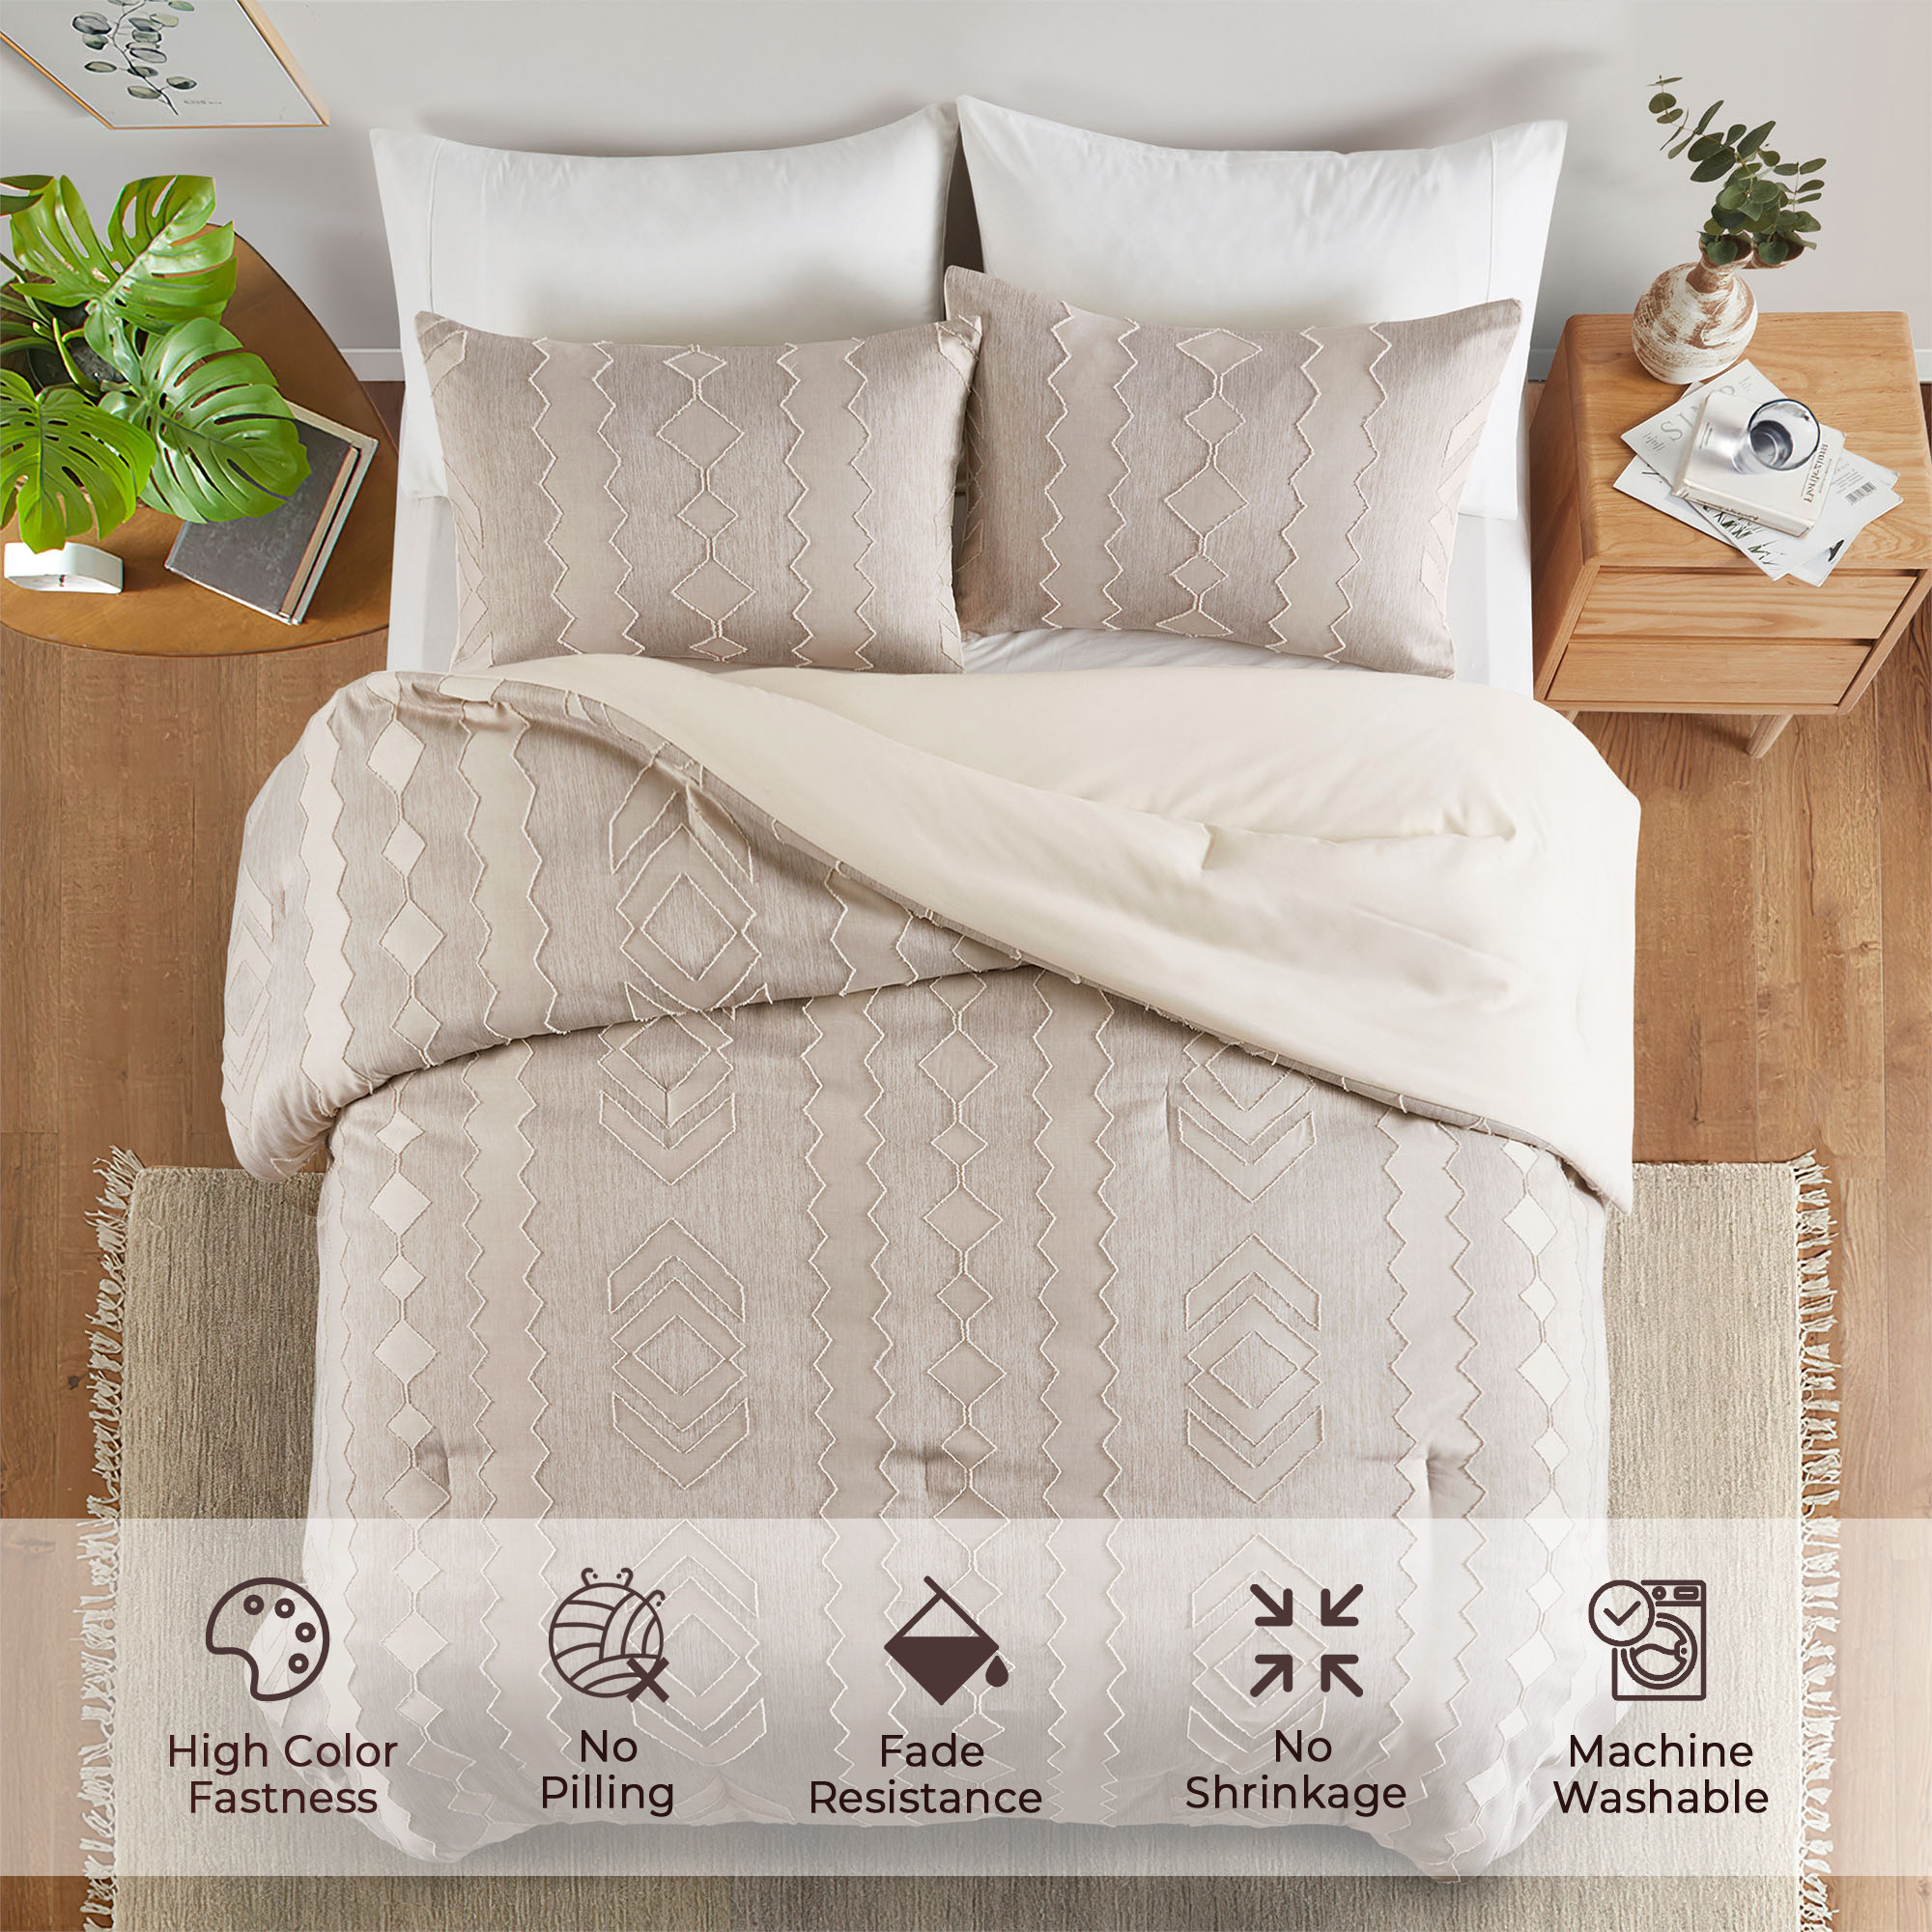 All-Season Comforter Set - Reversible Bedding Set With Super Soft Down Alternative Fill - Twin Size